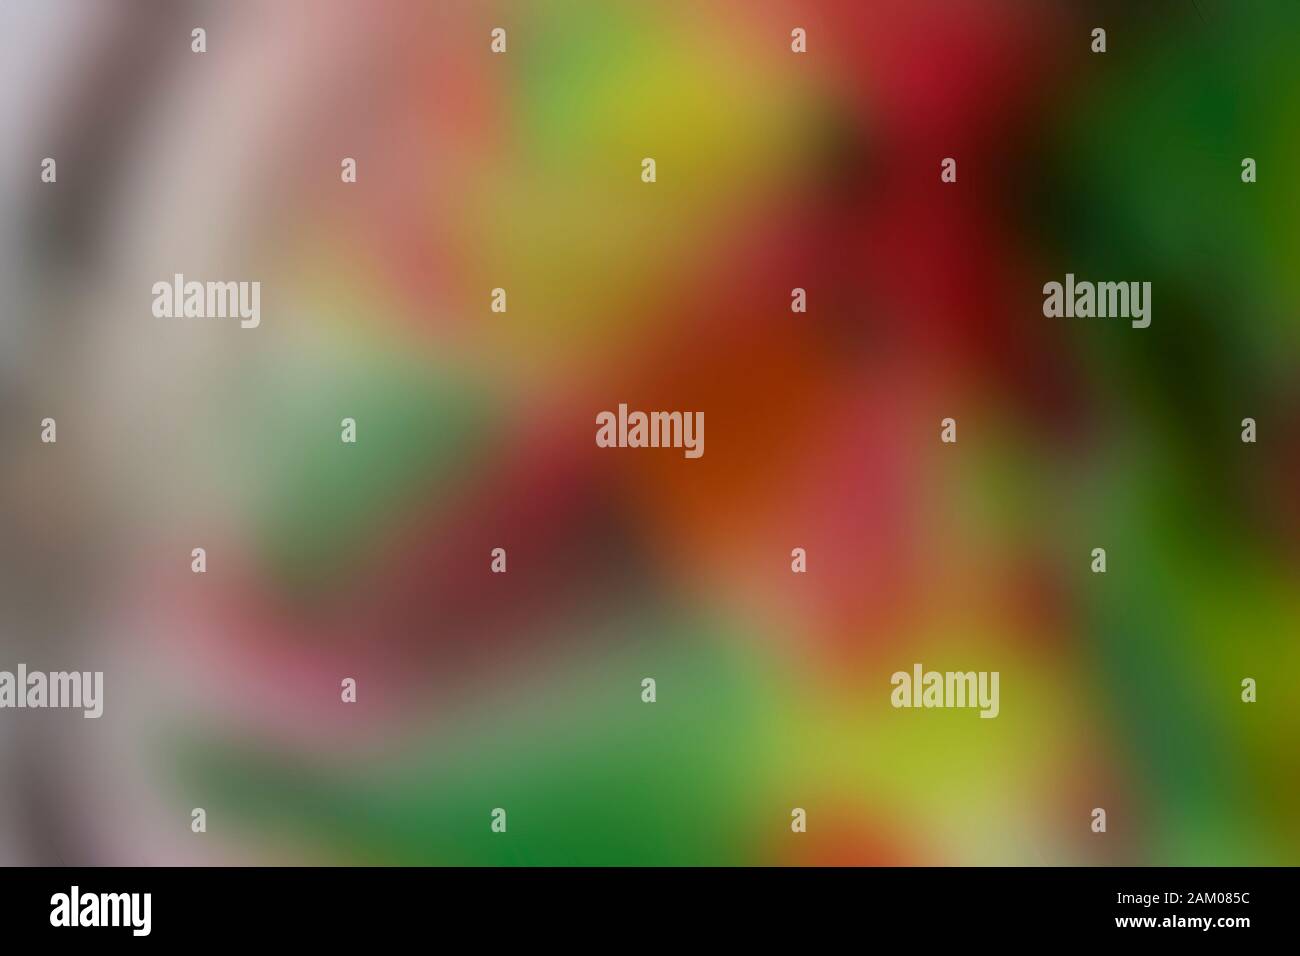 Multi colored abstract background pattern green red pink white Stock Photo